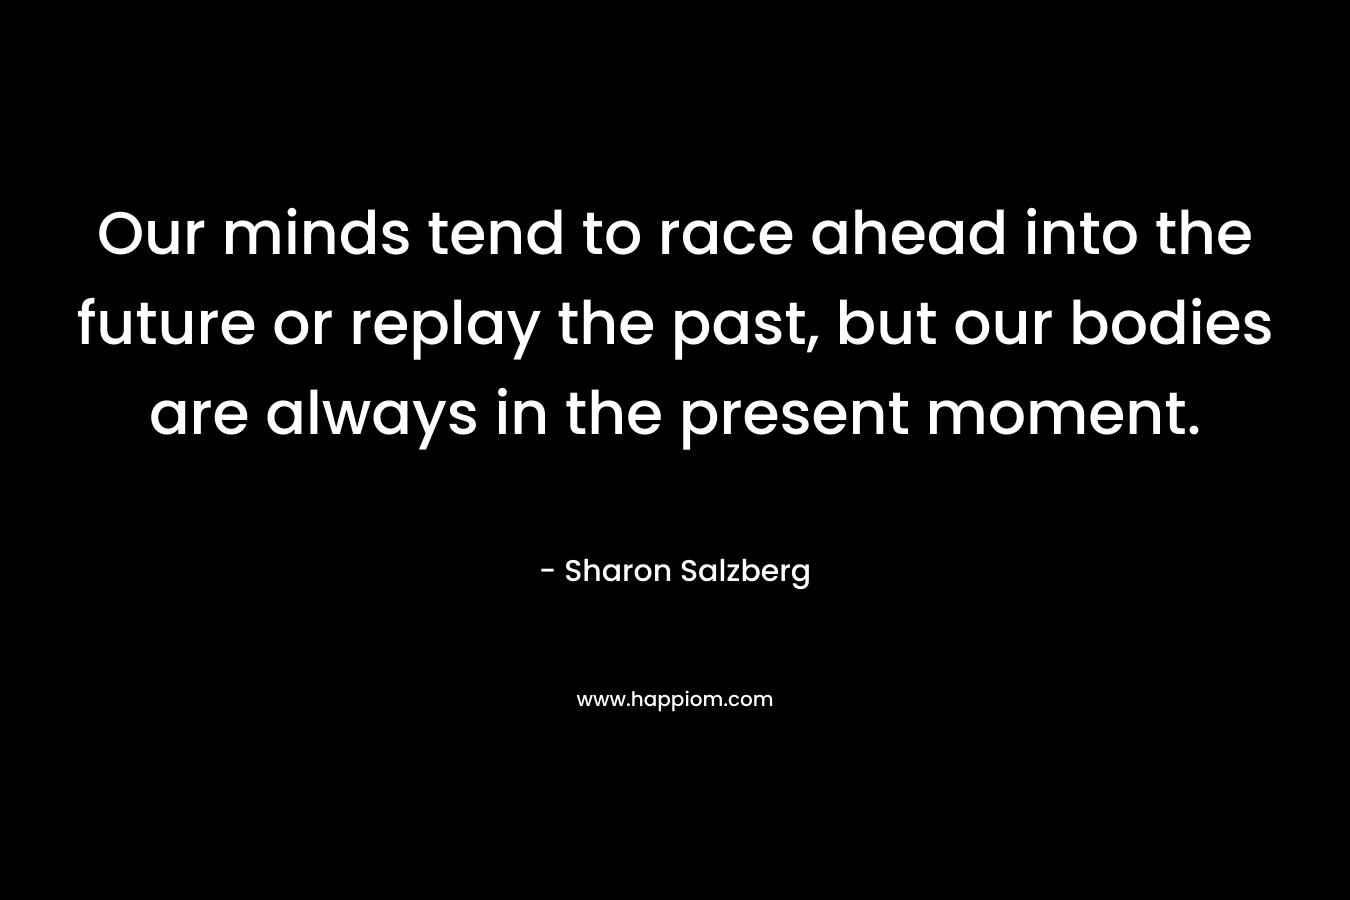 Our minds tend to race ahead into the future or replay the past, but our bodies are always in the present moment.